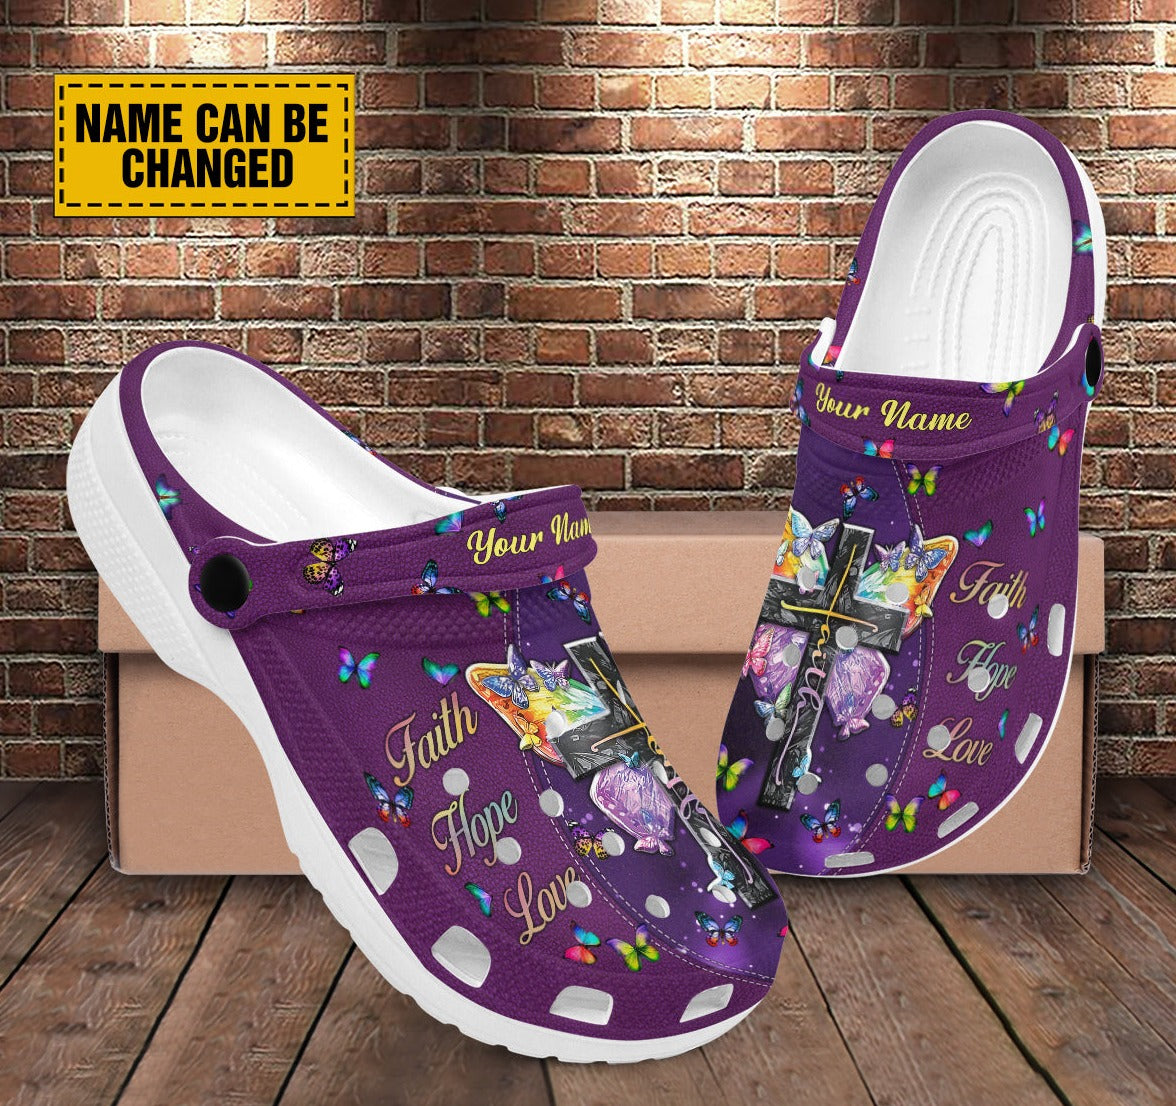 Teesdily | Faith Hope Love Customized Clogs Shoes, Gift For Jesus Lovers, God Faith Believers, Christian Gifts, Purple Clogs Shoes, Kid & Adult Unisex Clogs Shoes Eva